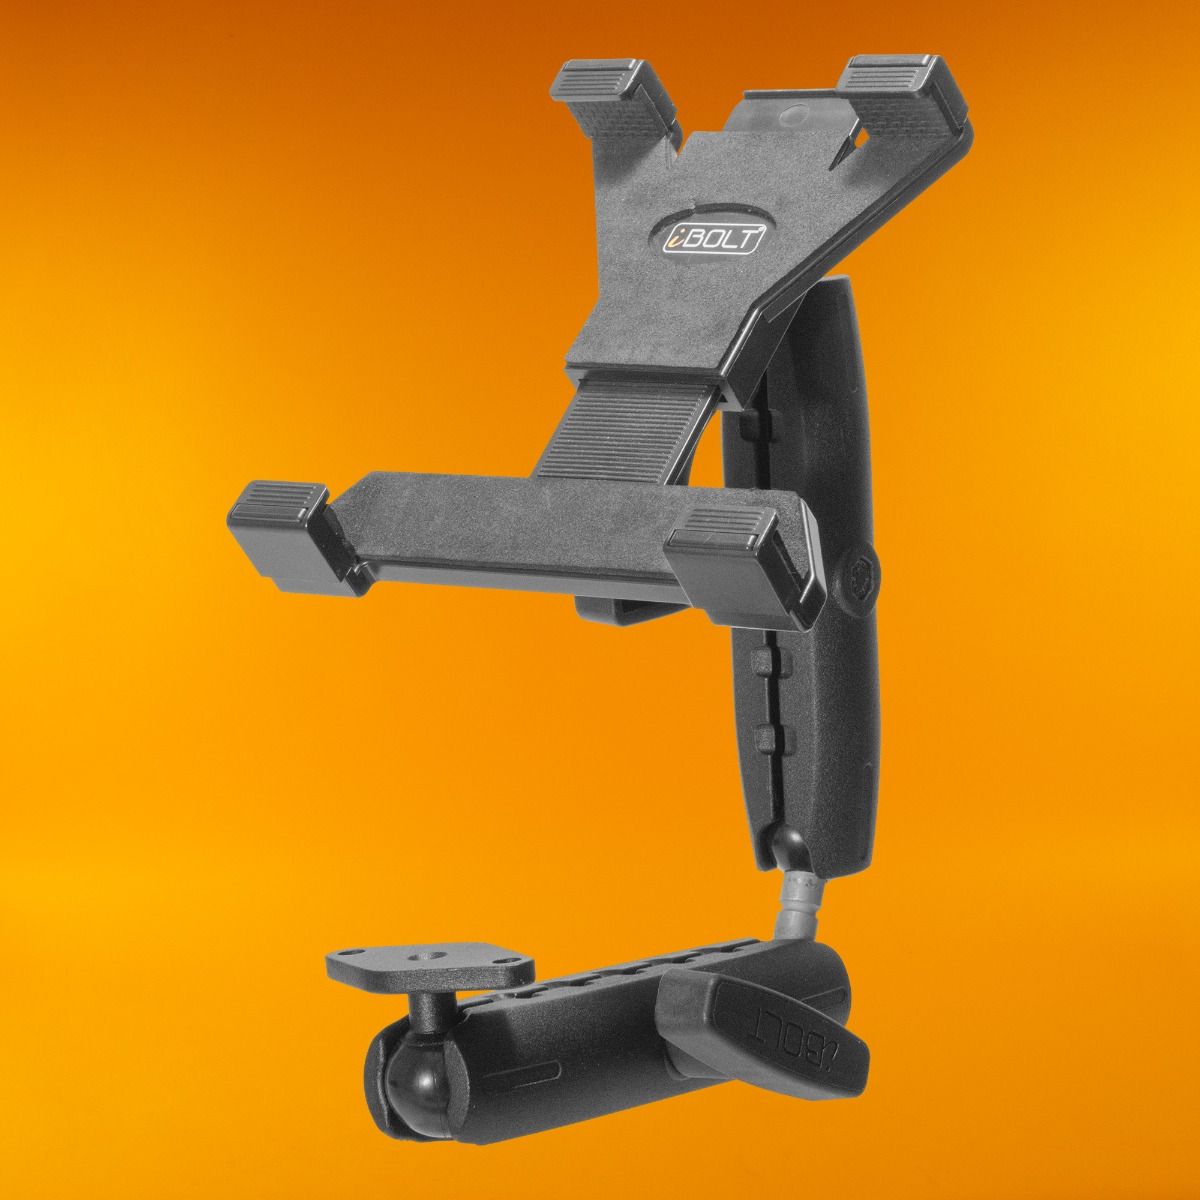 iBOLT AccessiBOLT ArmTrack- for Wheelchairs, Rehab Chairs, and Mobility Devices with a Track System